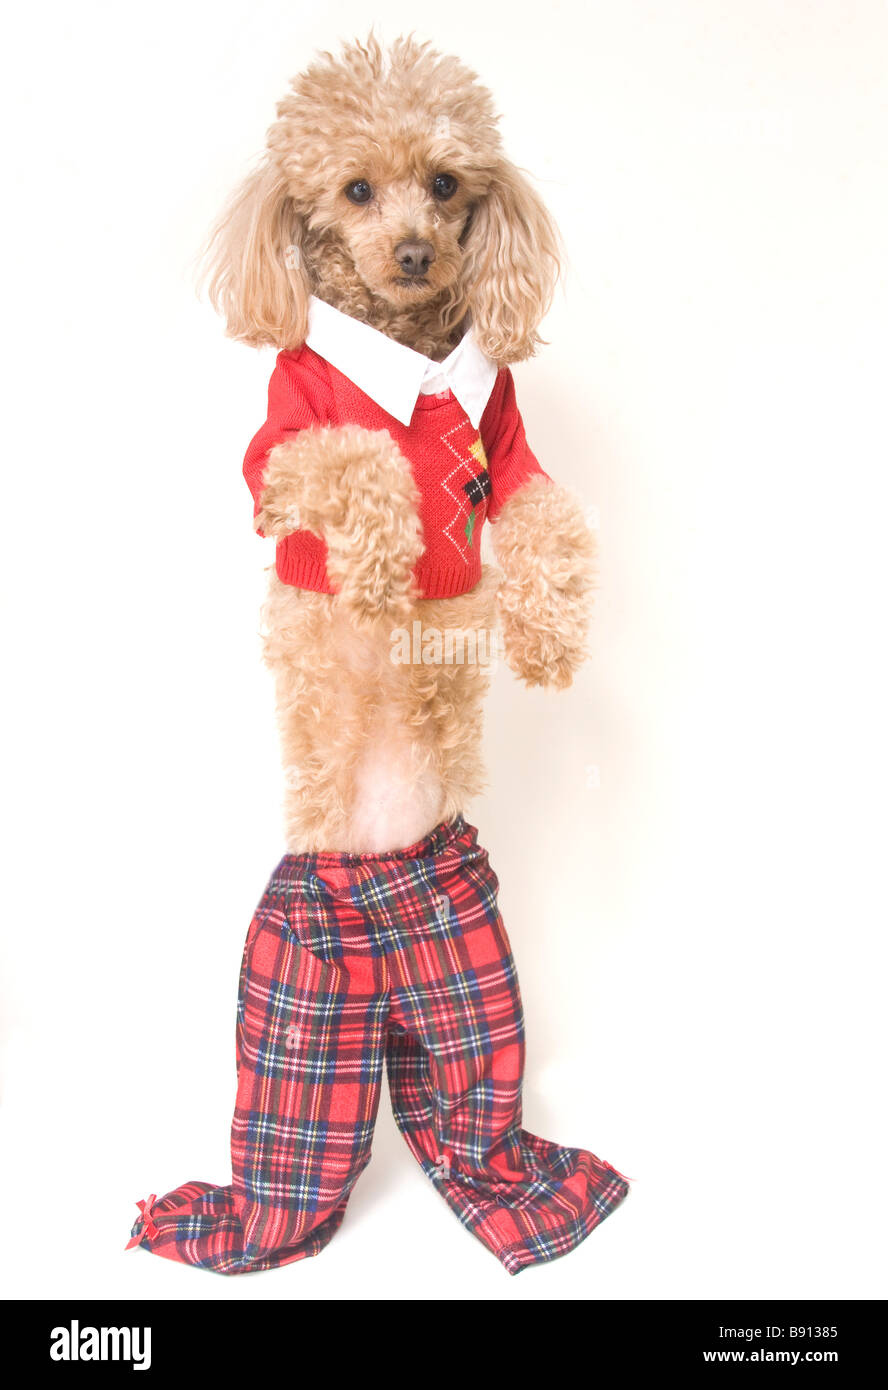 Dog dressed up in preppy, almost clown-like clothes Stock Photo